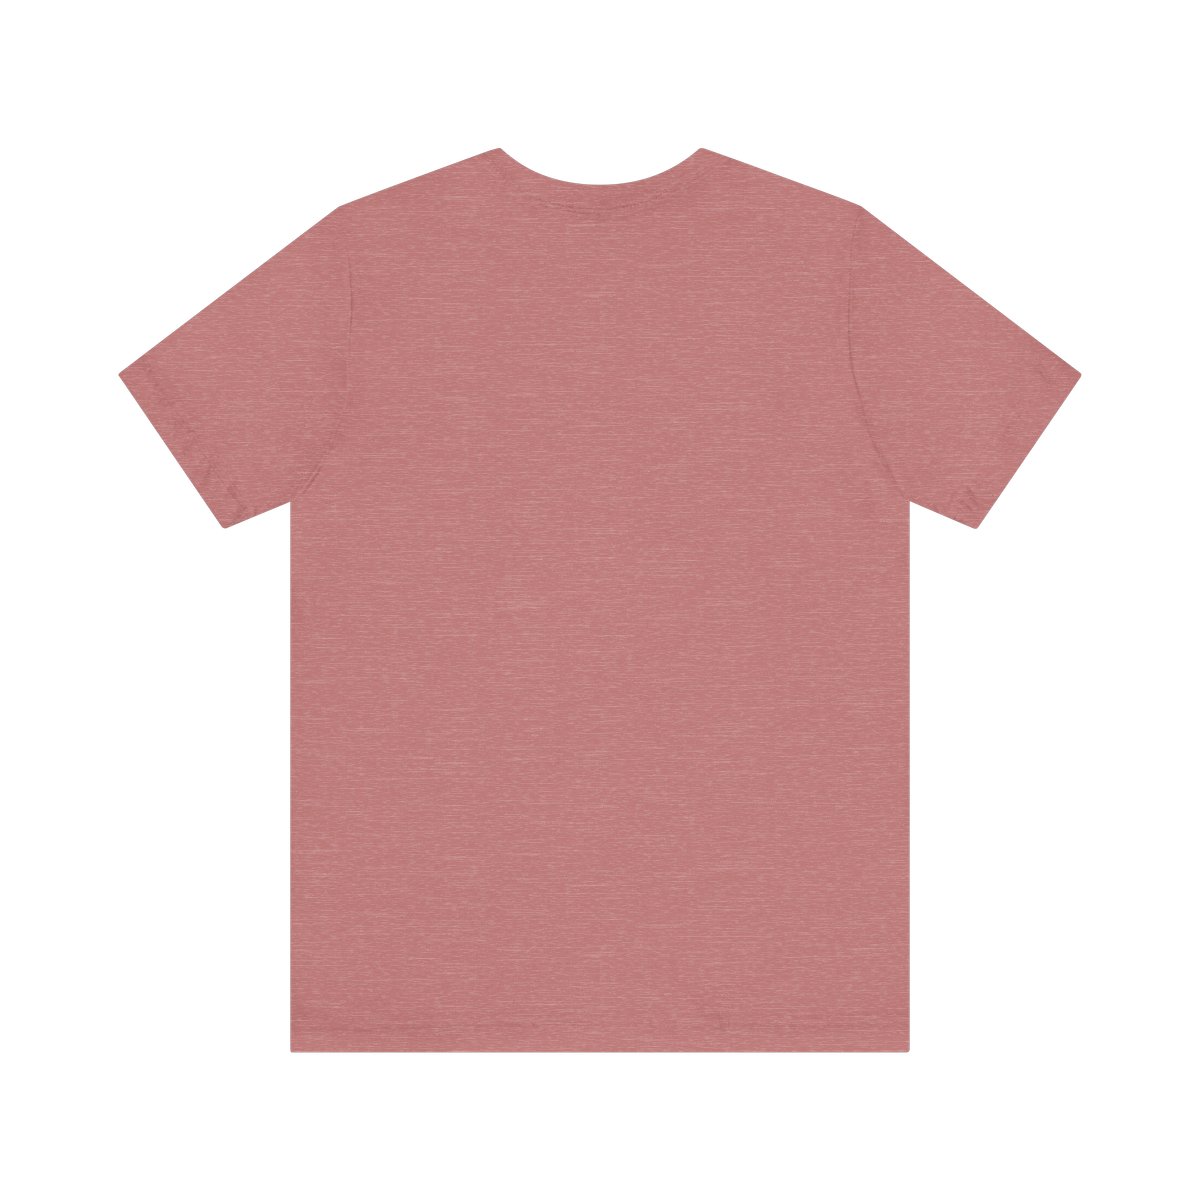 Mother of Nature Short Sleeve T-Shirt product thumbnail image